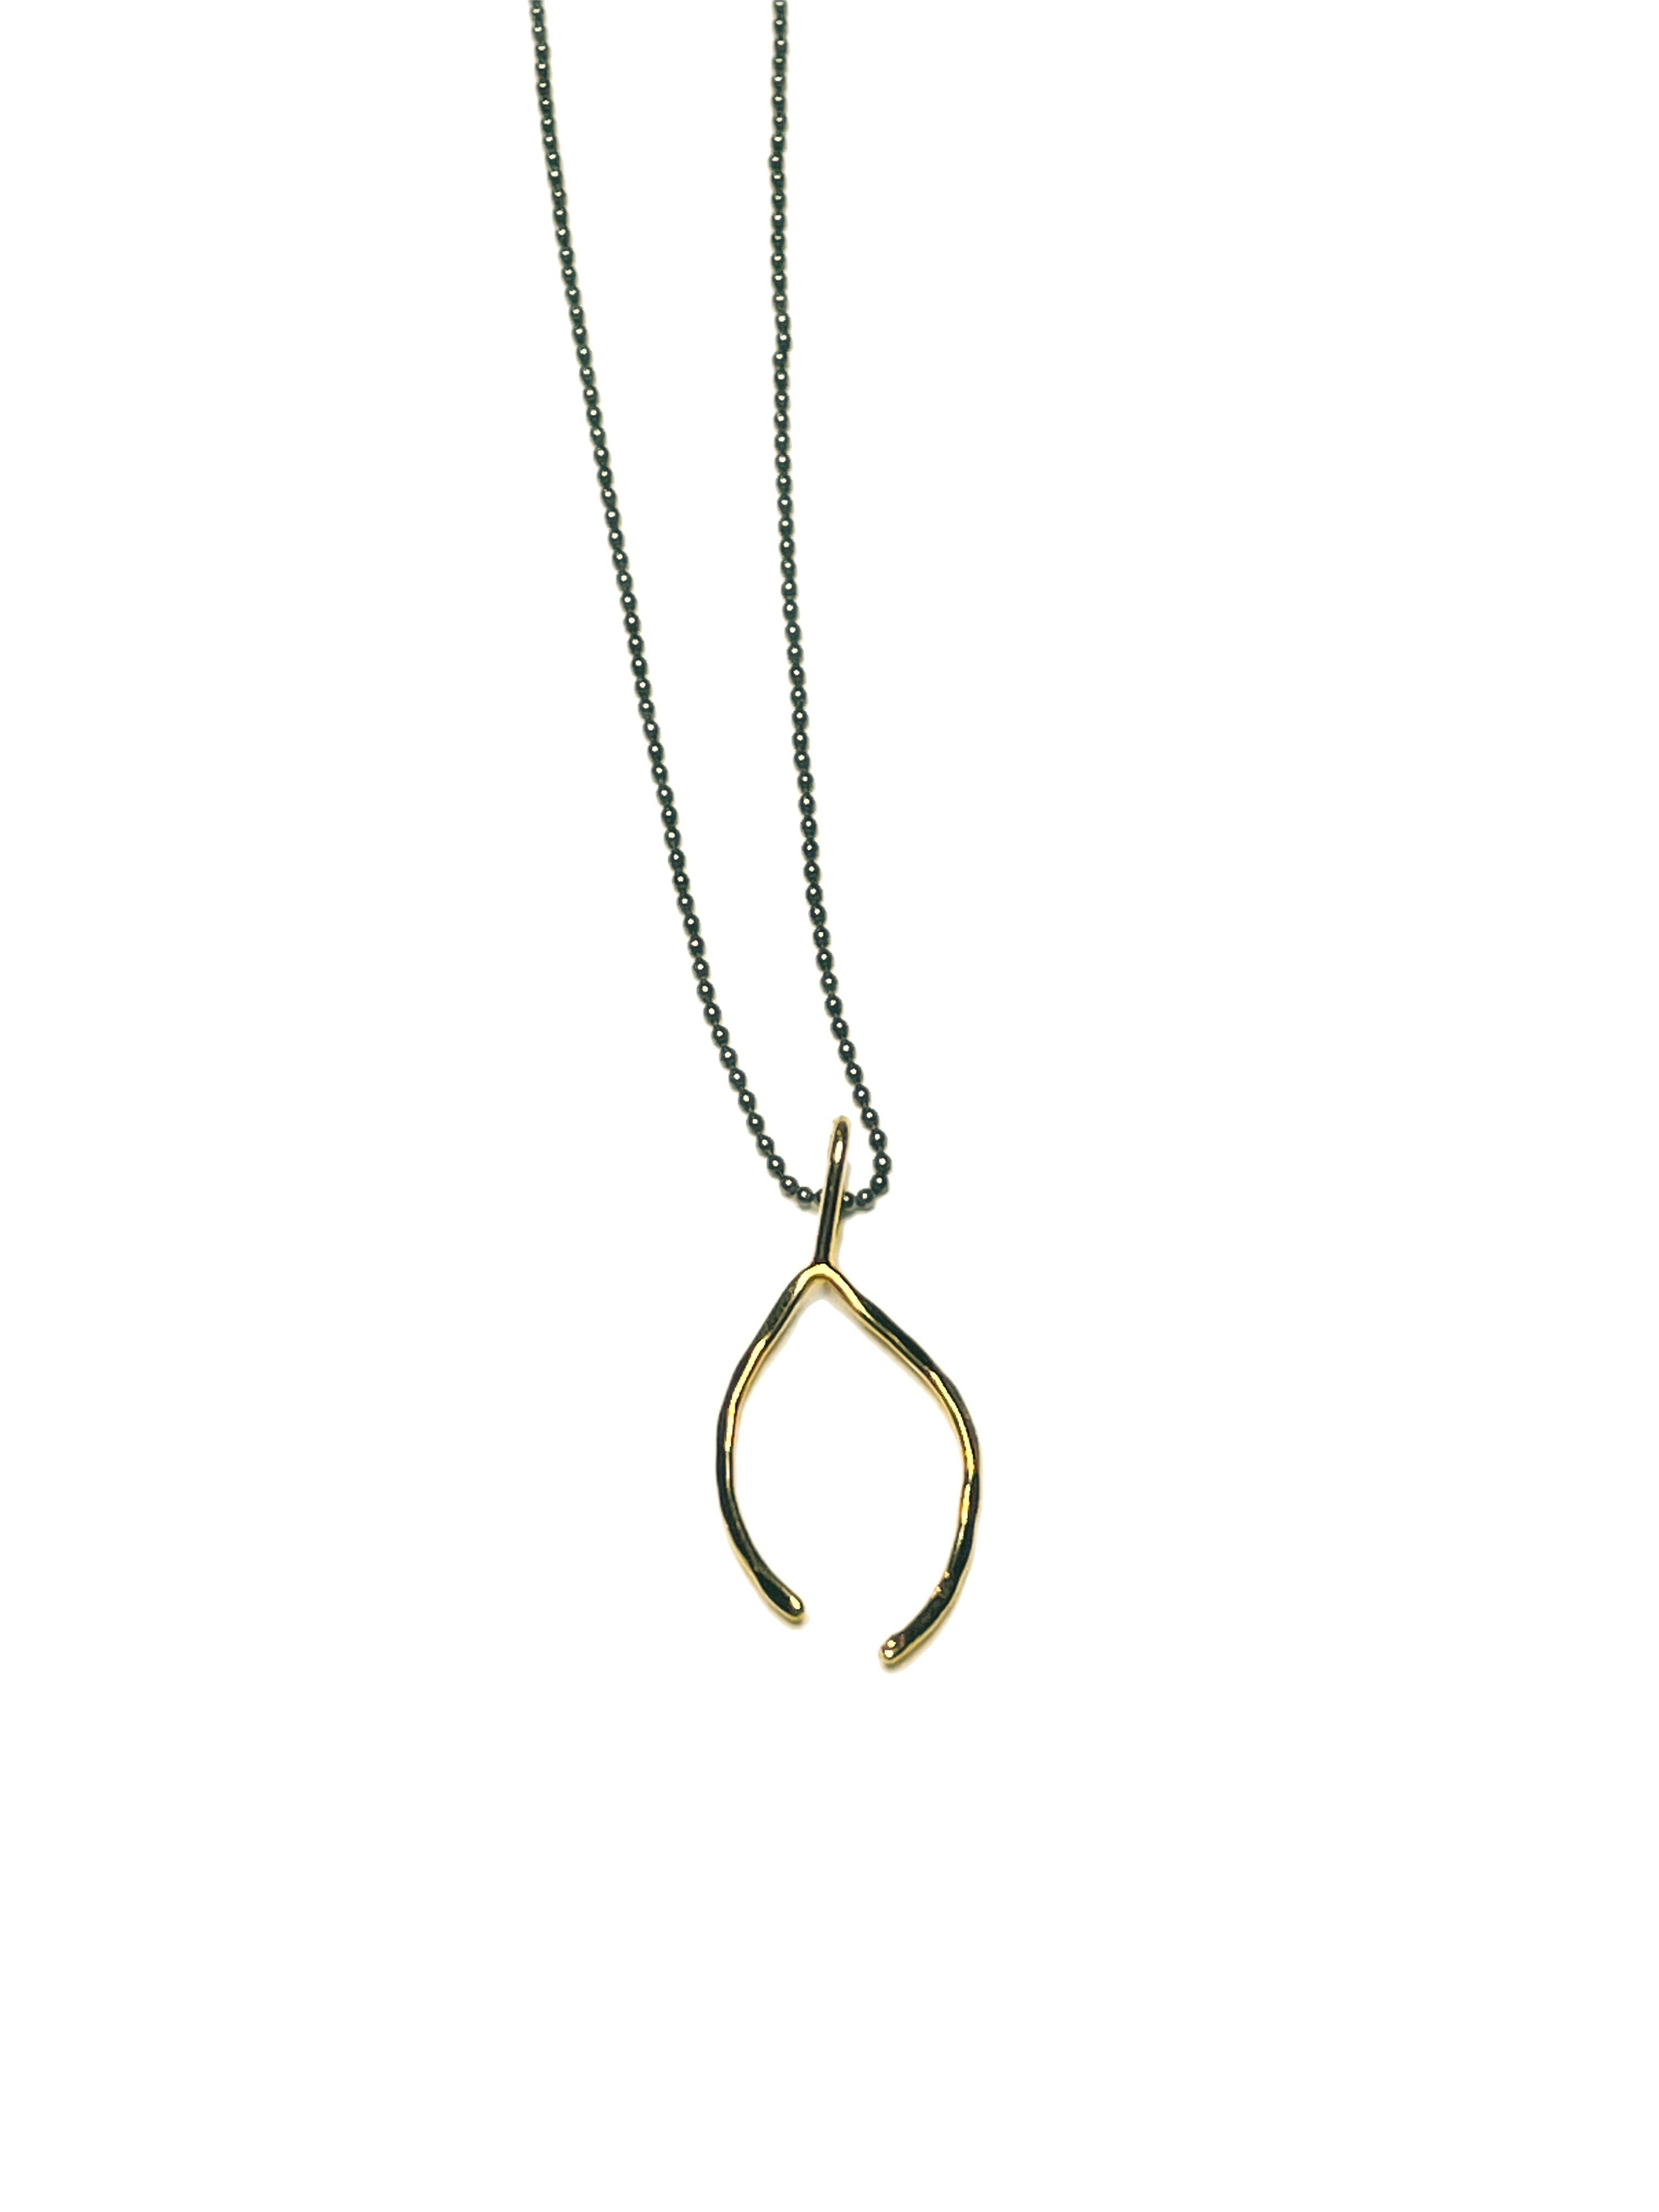 Wish - sterling silver necklace with wishbone accent